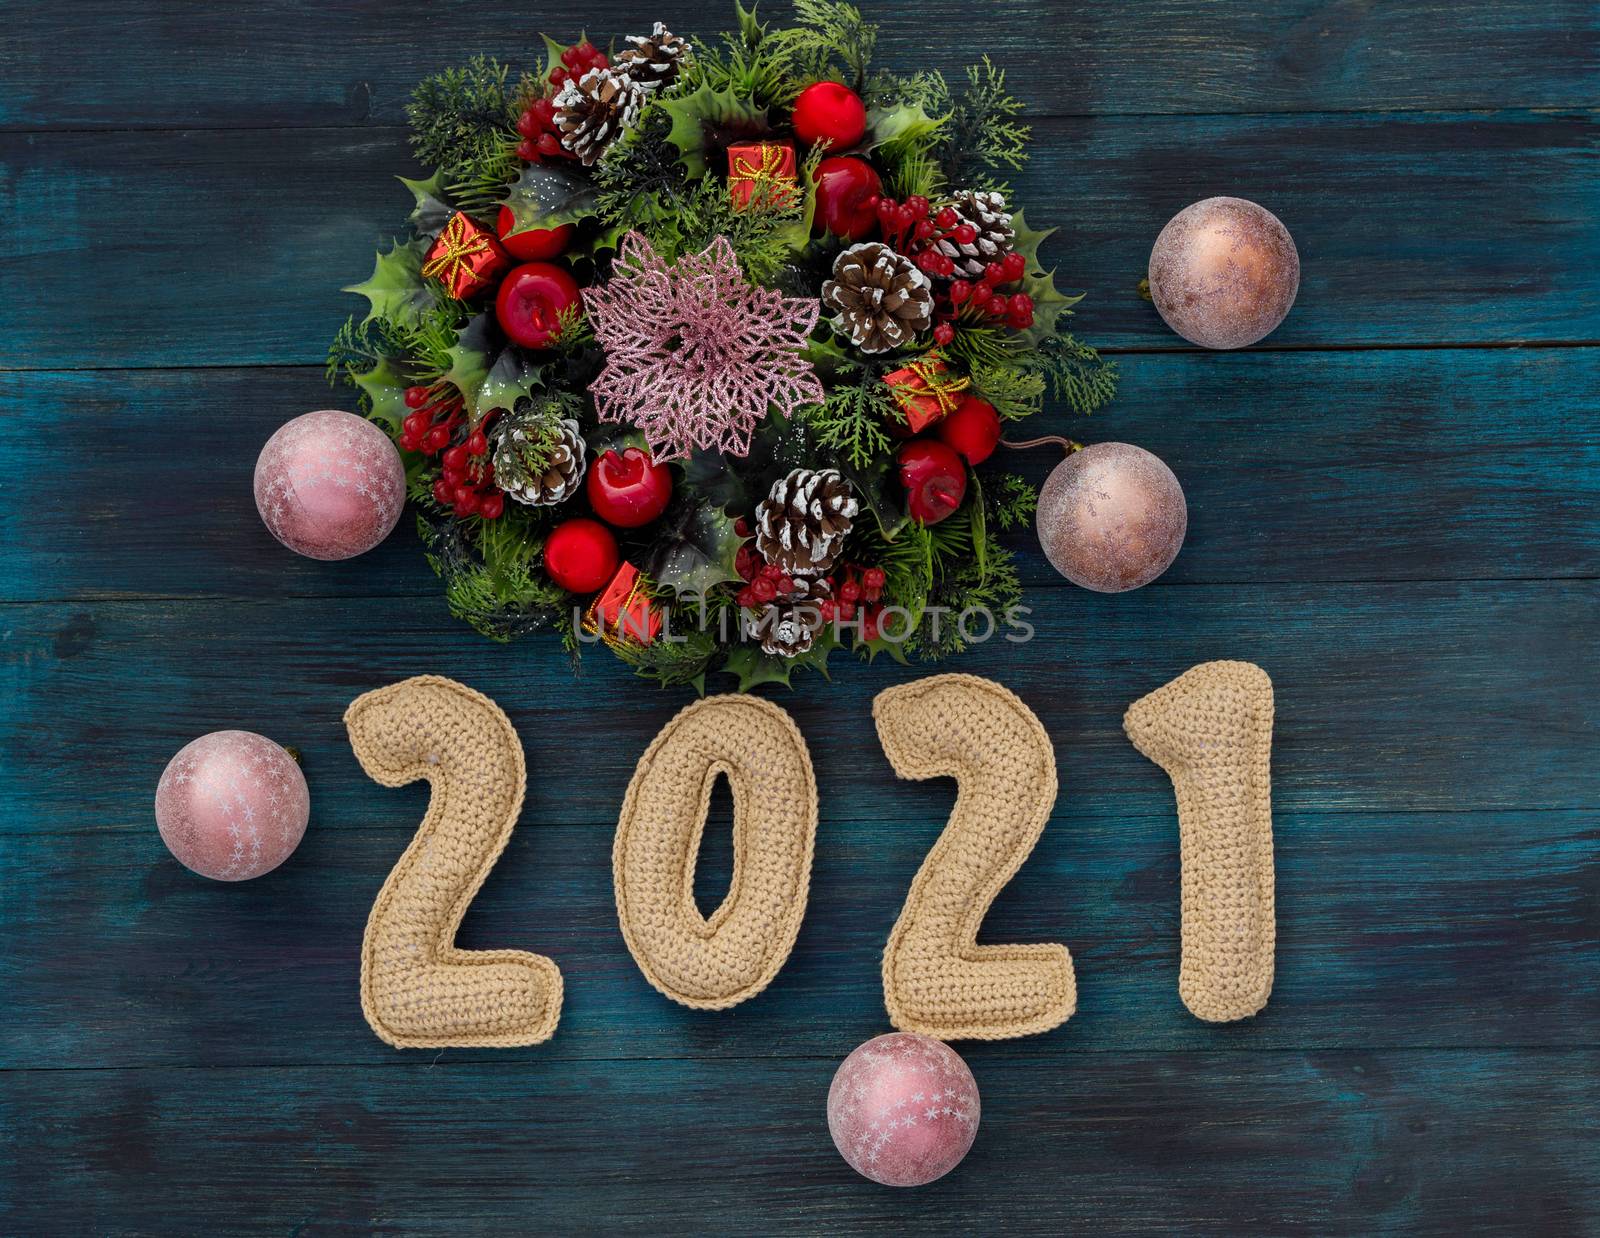 .Christmas background with knitted numbers 2021 and decorative wreath. by galinasharapova